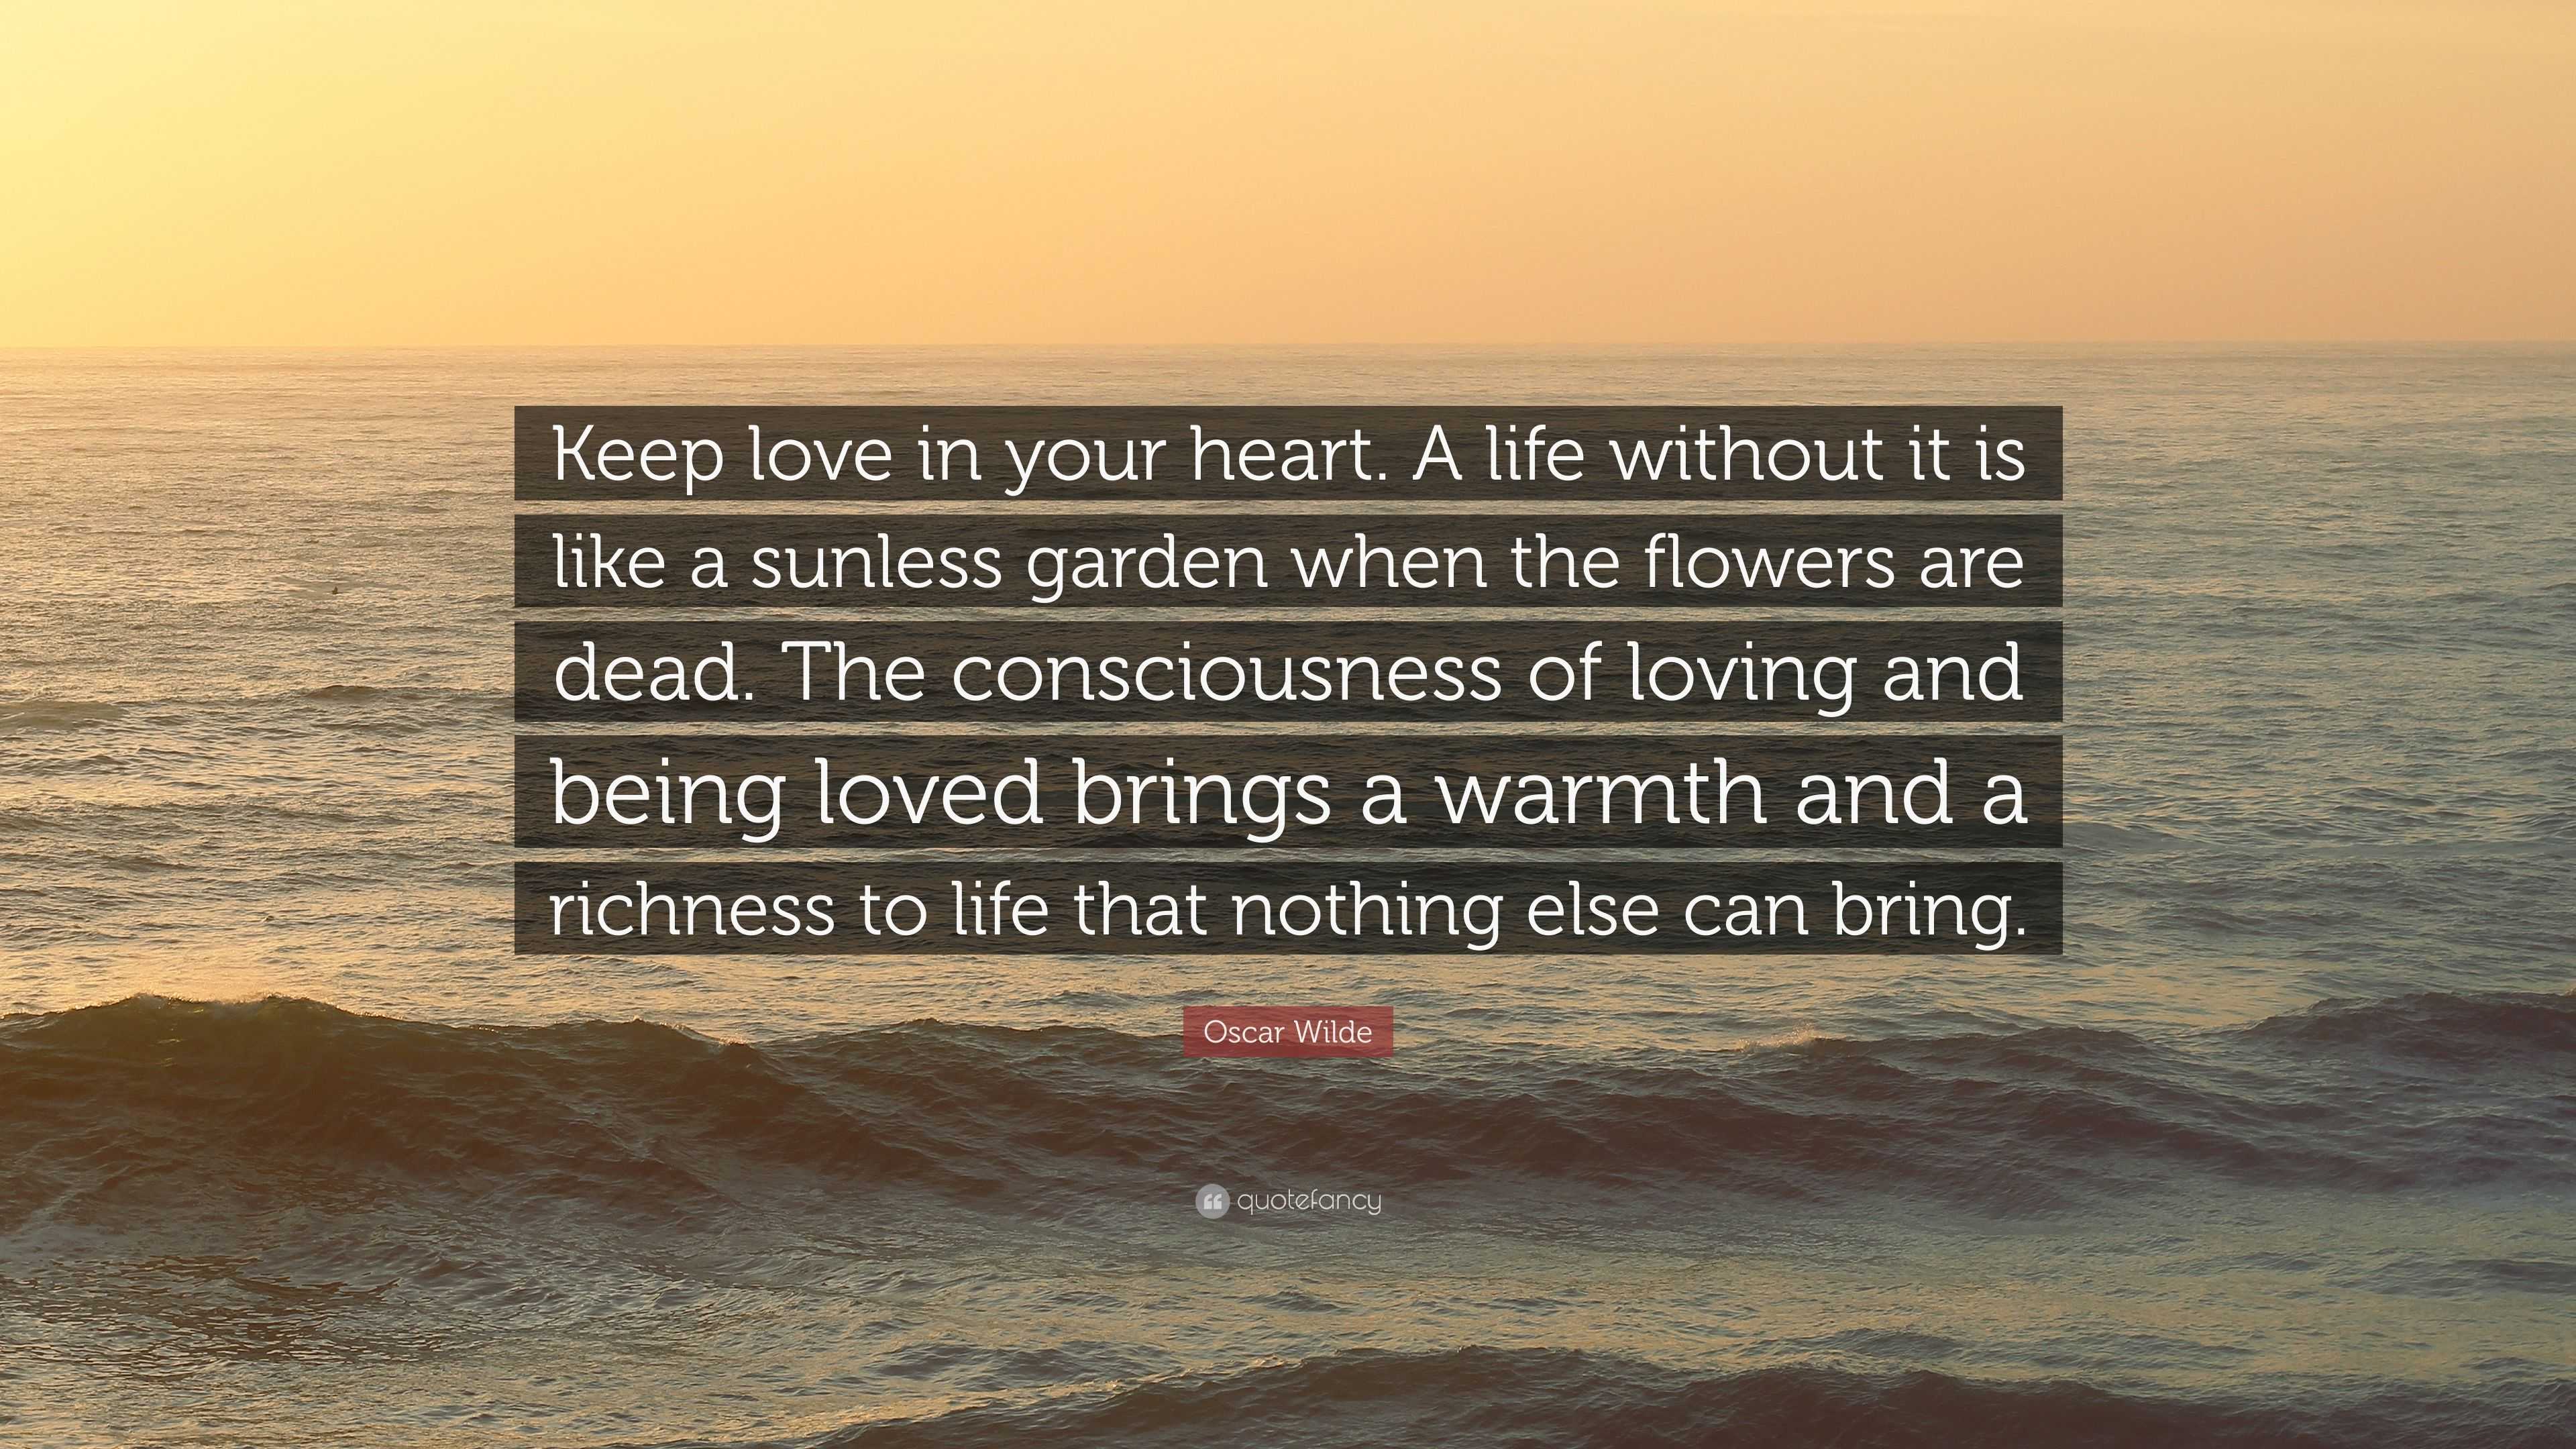 Oscar Wilde Quote: “Keep love in your heart. A life without it is like